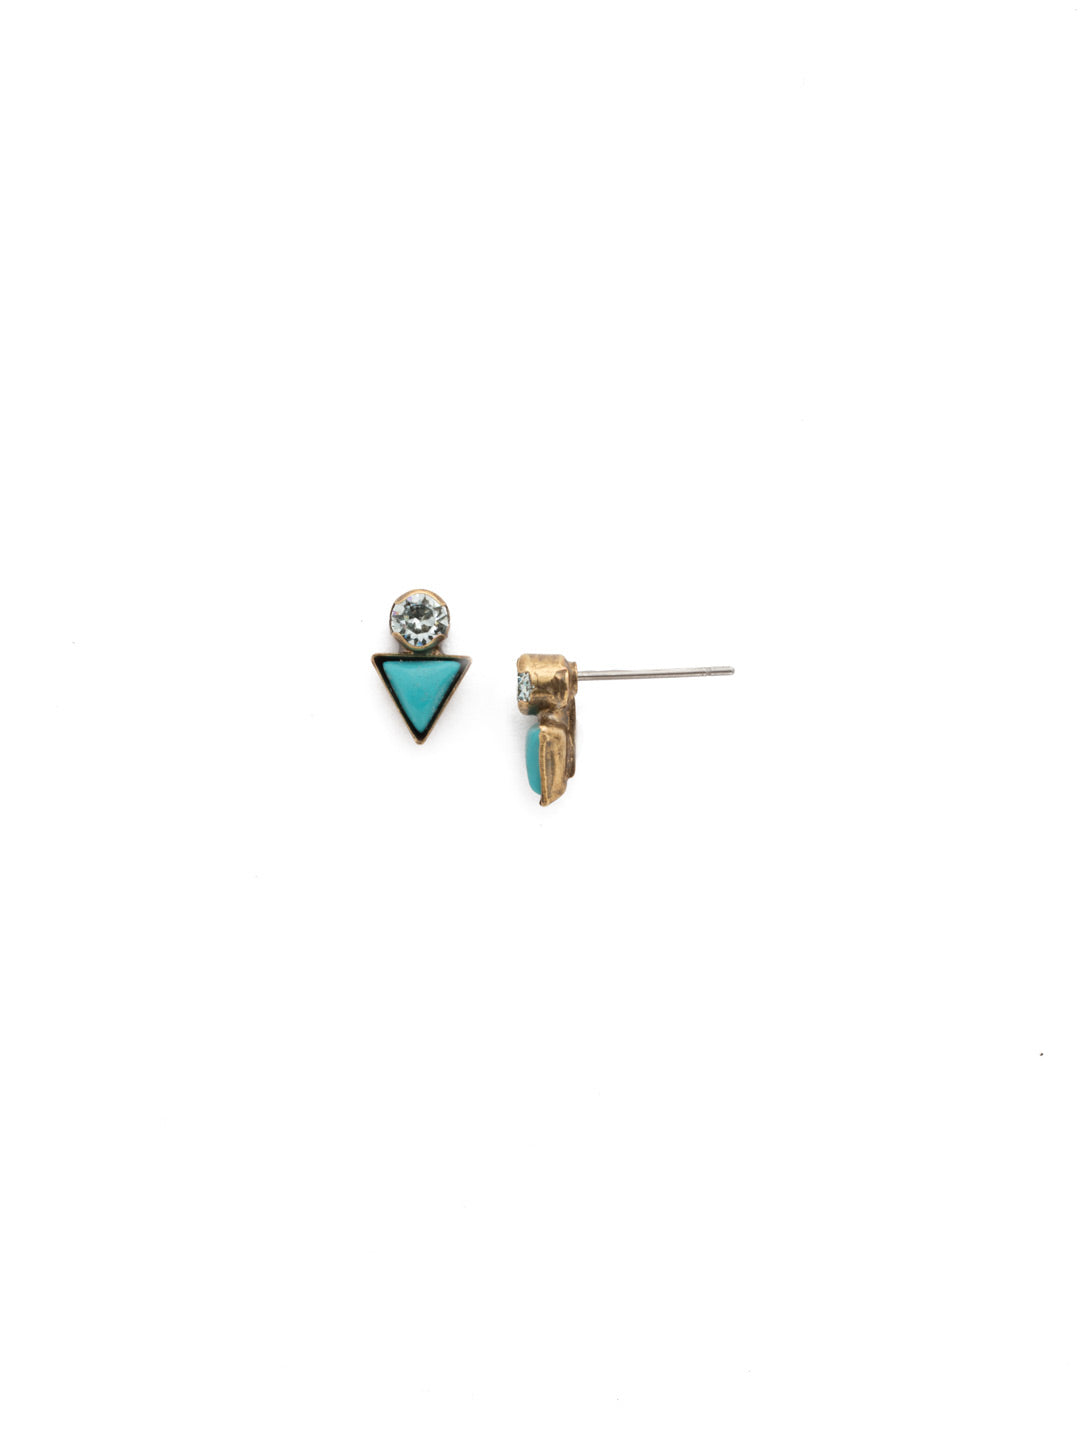 Kyra Earring Stud Earrings - EDN13AGAZ - A classic Sorrelli style to make a statement or wear everyday. From Sorrelli's Azure Allure collection in our Antique Gold-tone finish.